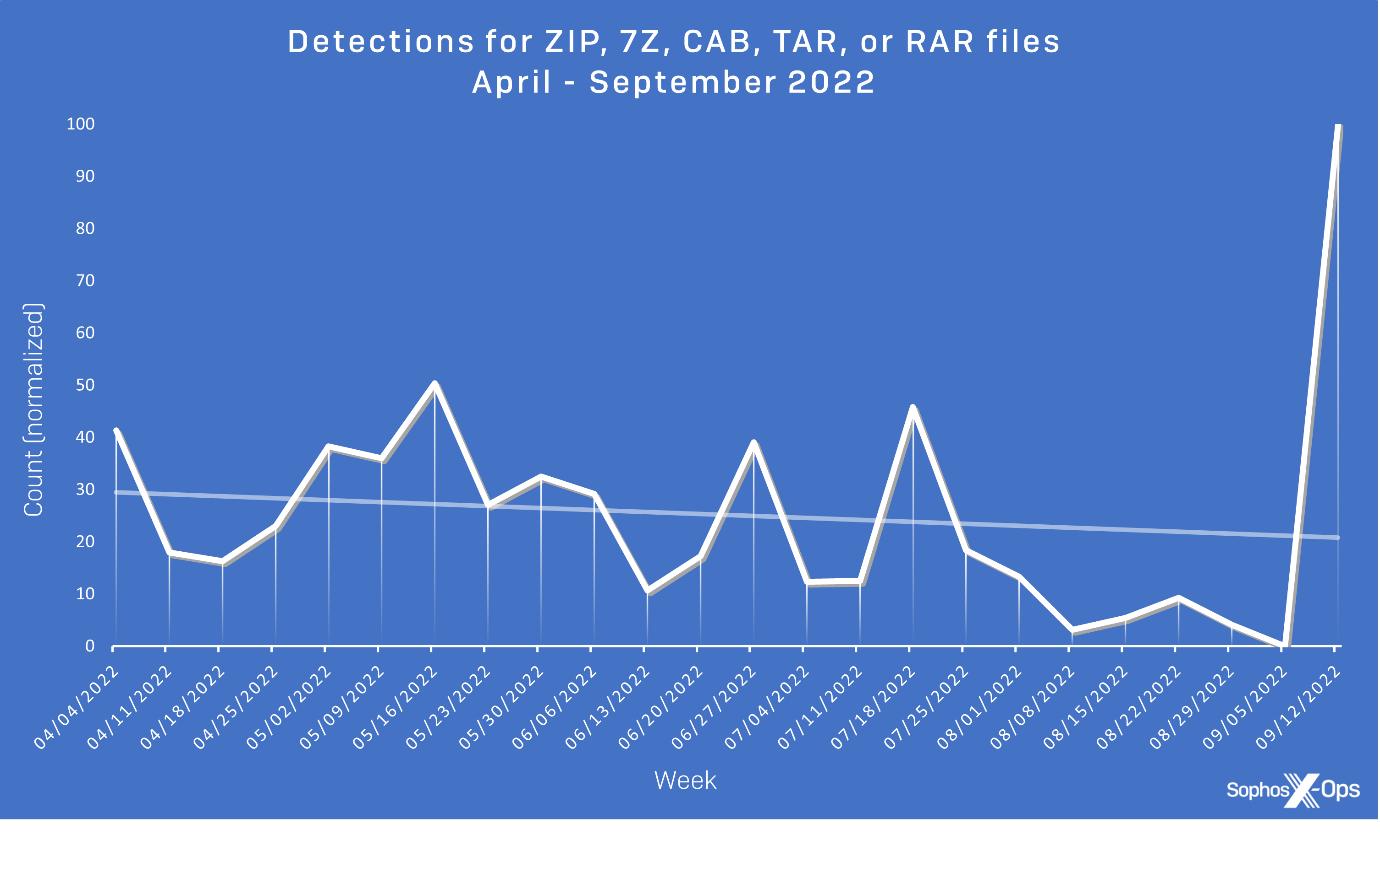 A line graph showing detections for common archive filetypes